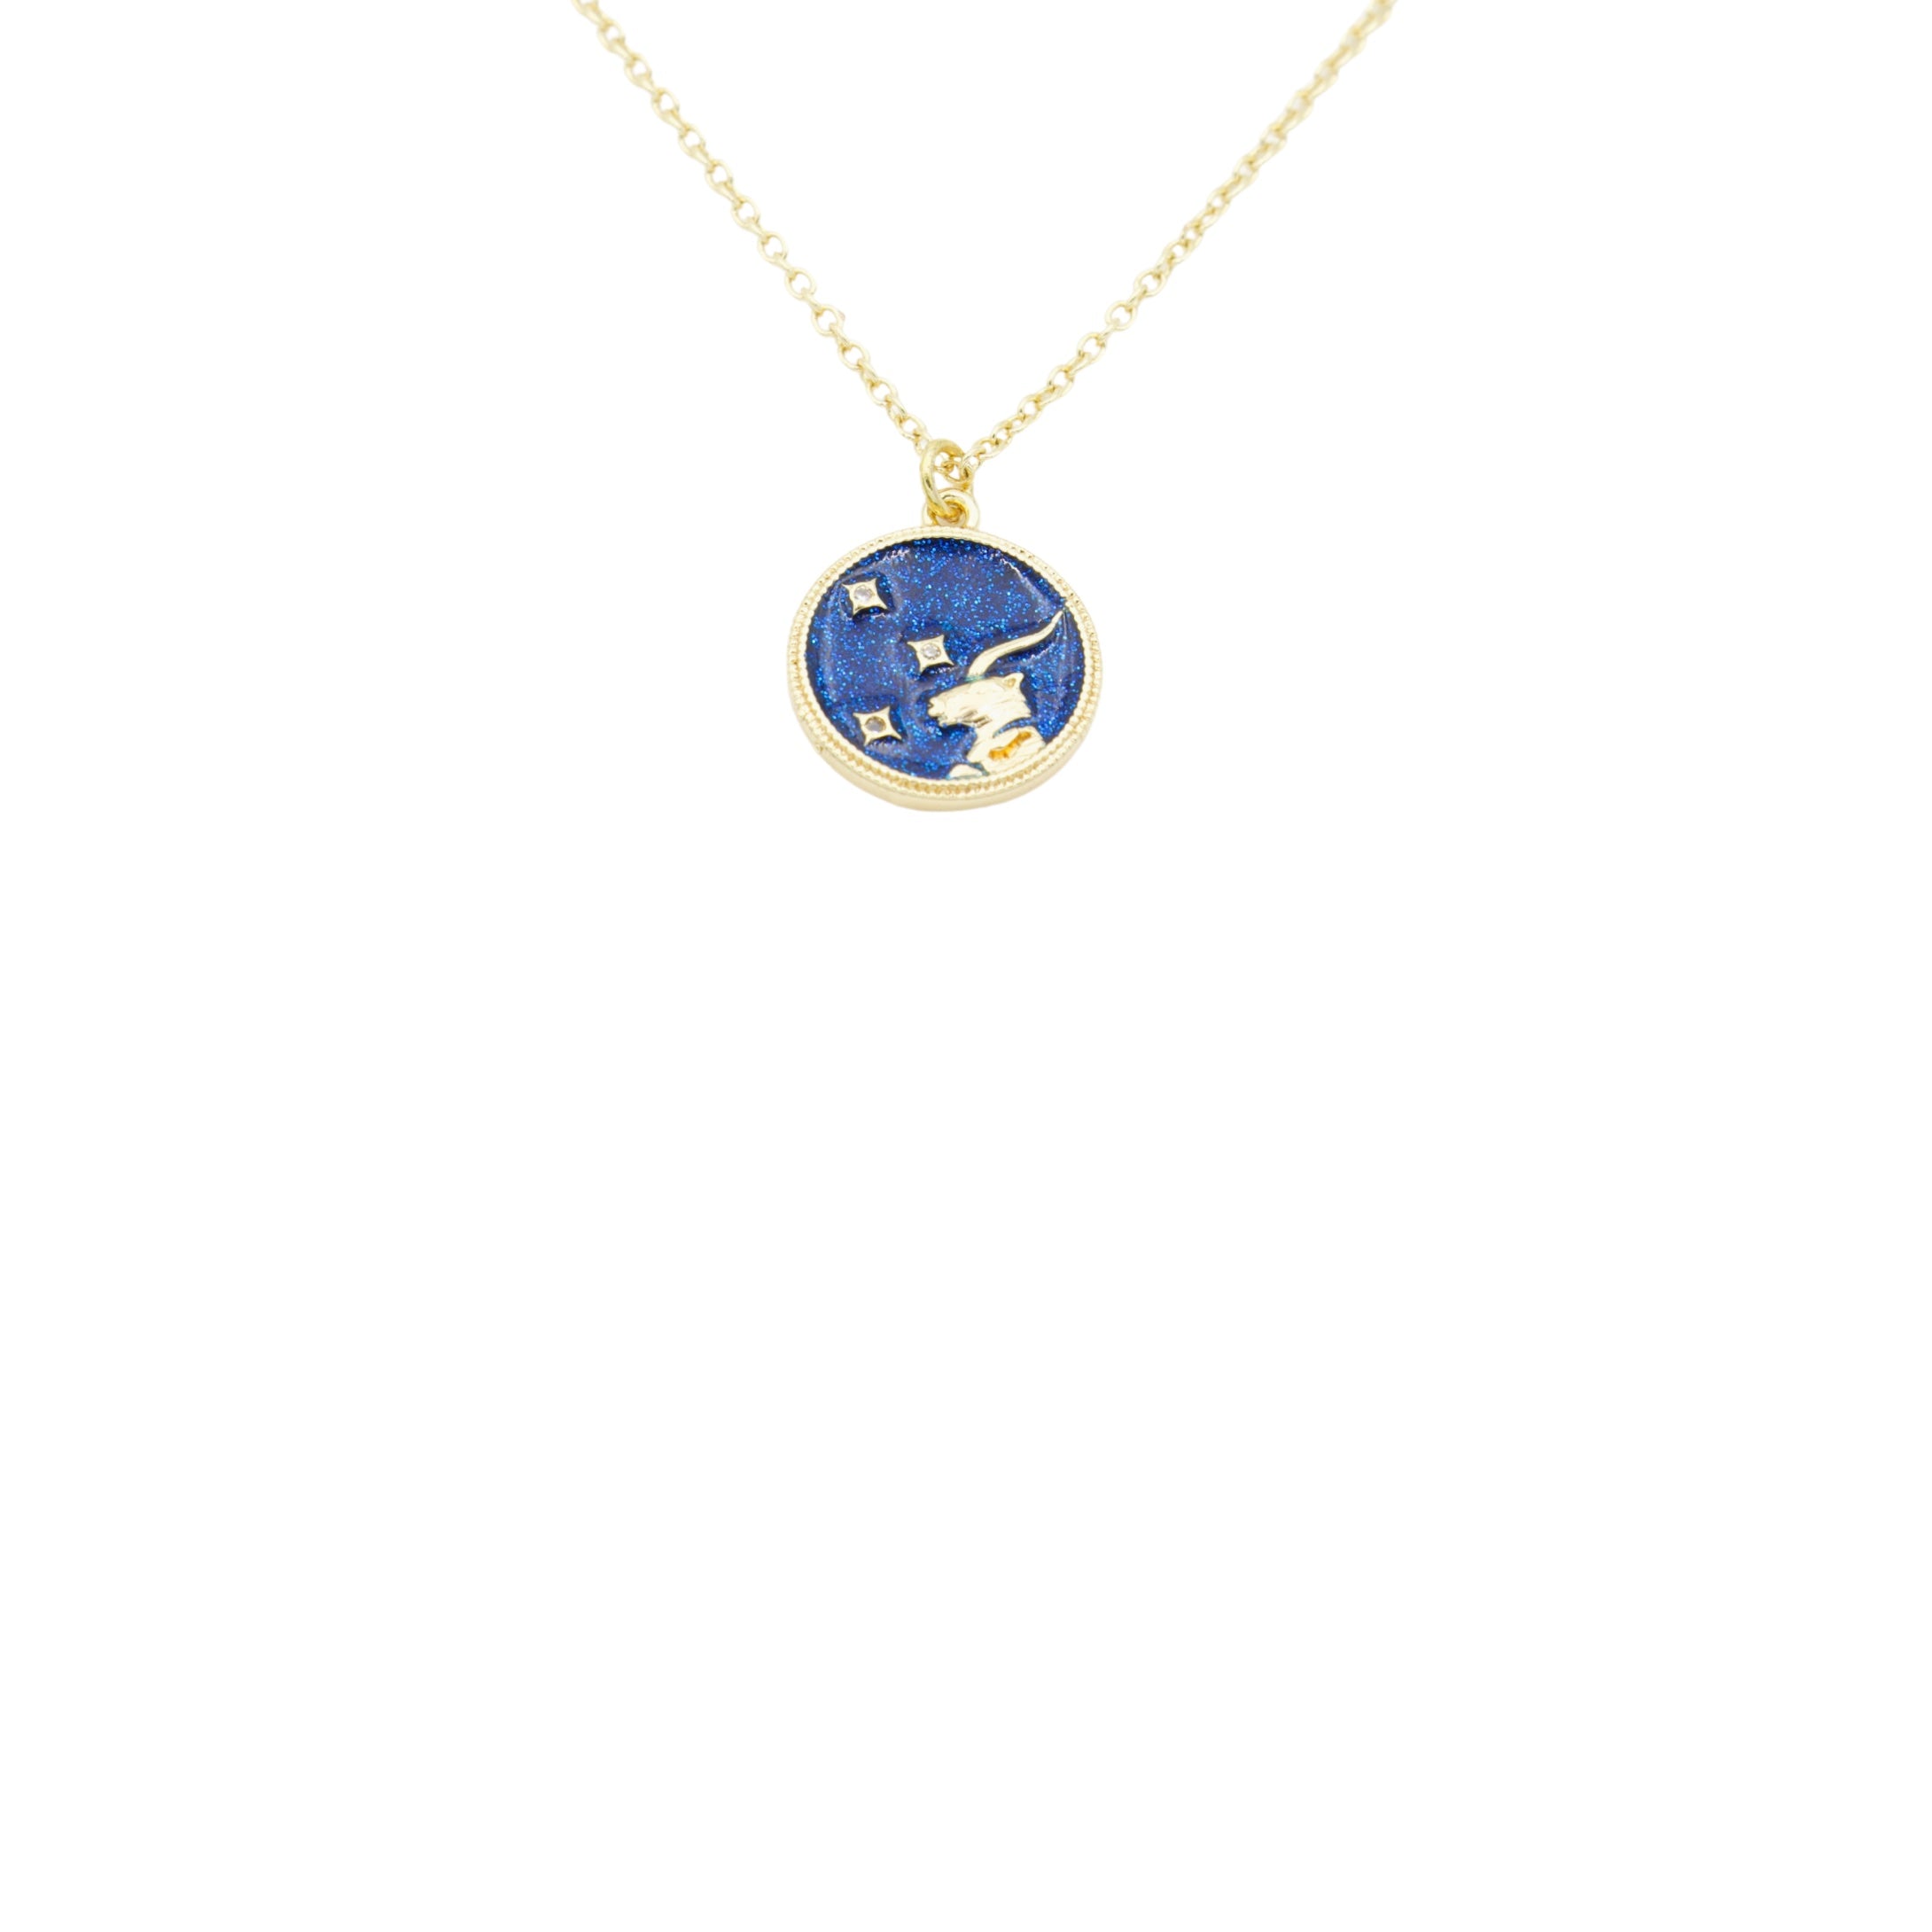 AW Boutique's Zodiac Astro Coin is a dainty pendant full of sparkle and shine.  This piece adds a pop of colour to your everyday wear and at 18 inches is a great length to mix and layer your other chains with.  Proudly wear either your own star sign or the star sign of a loved one close to your heart.  Zodiac shown is Capricorn.